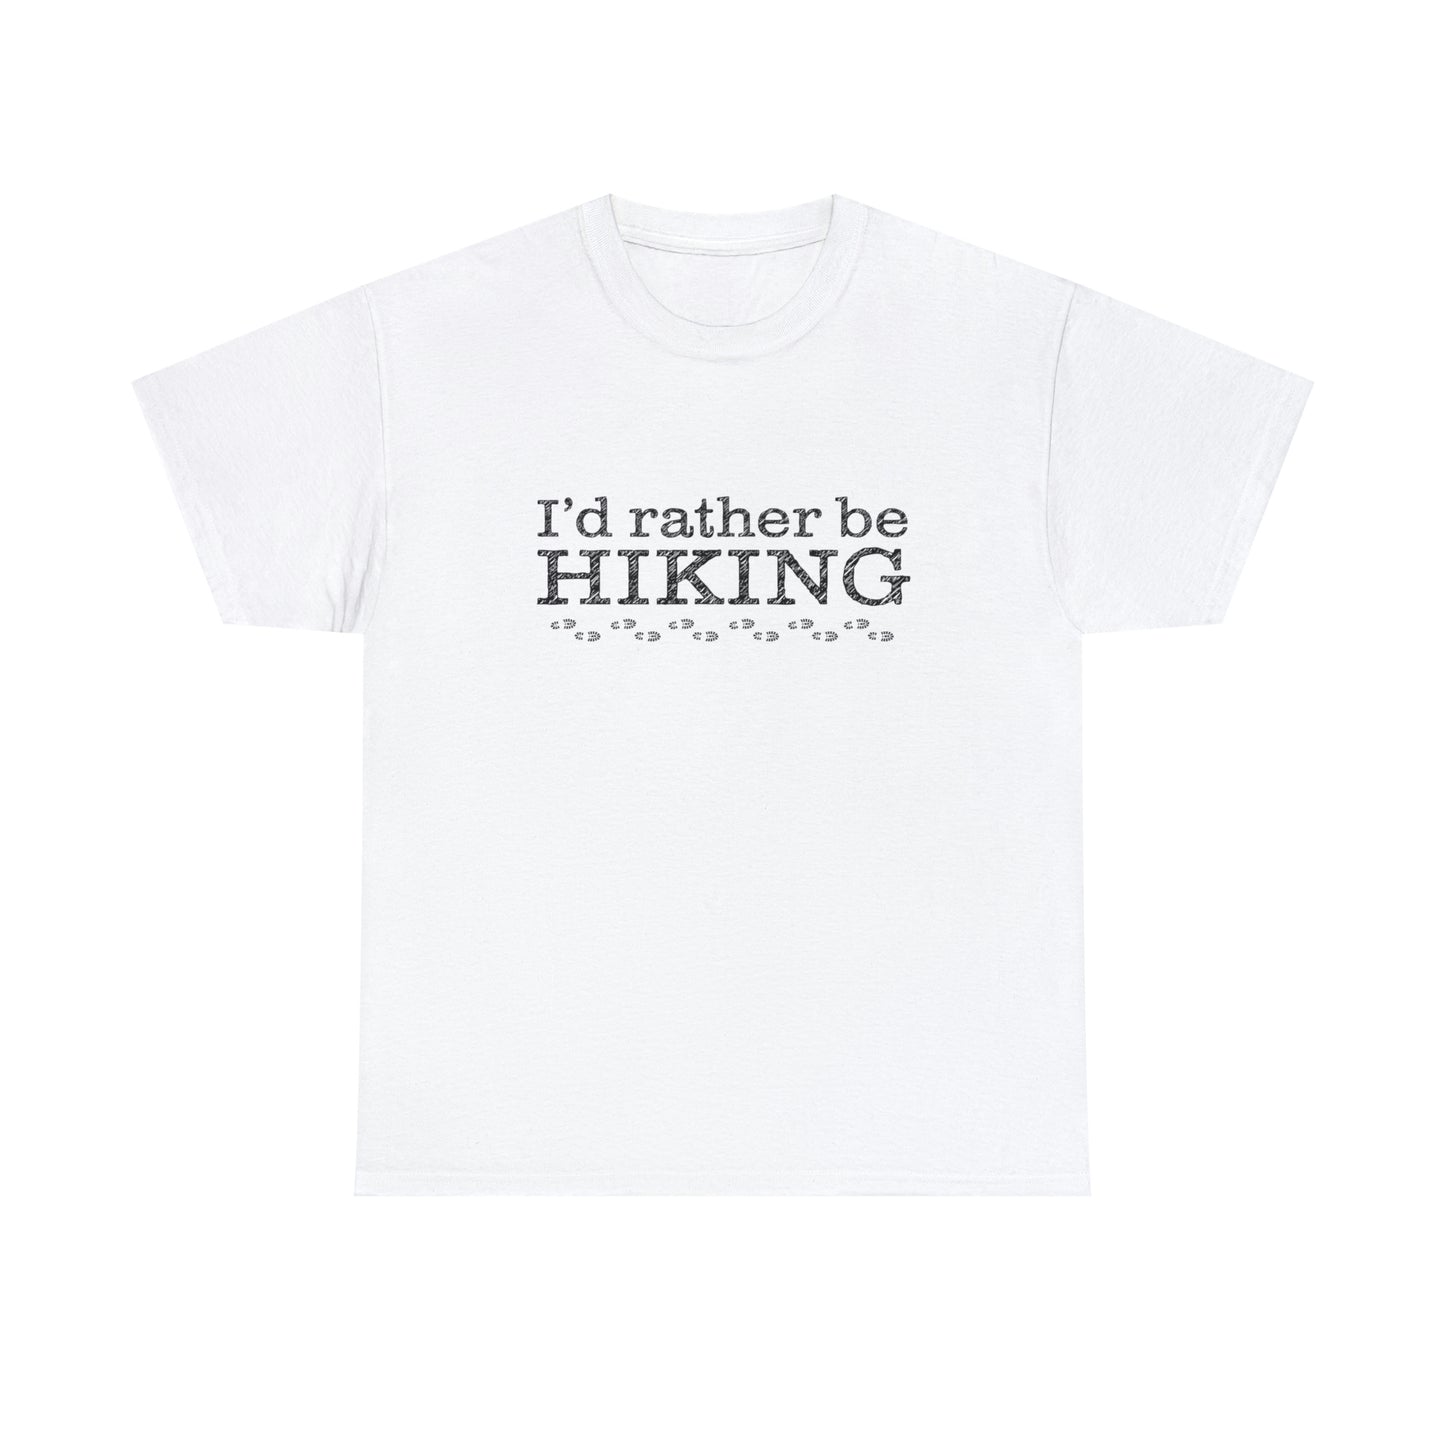 Hiking T-Shirt For Hikers TShirt For Outdoor Adventure T Shirt For Wilderness Shirt For Backwoods T-Shirt For Trail T Shirt For Trekking Shirt